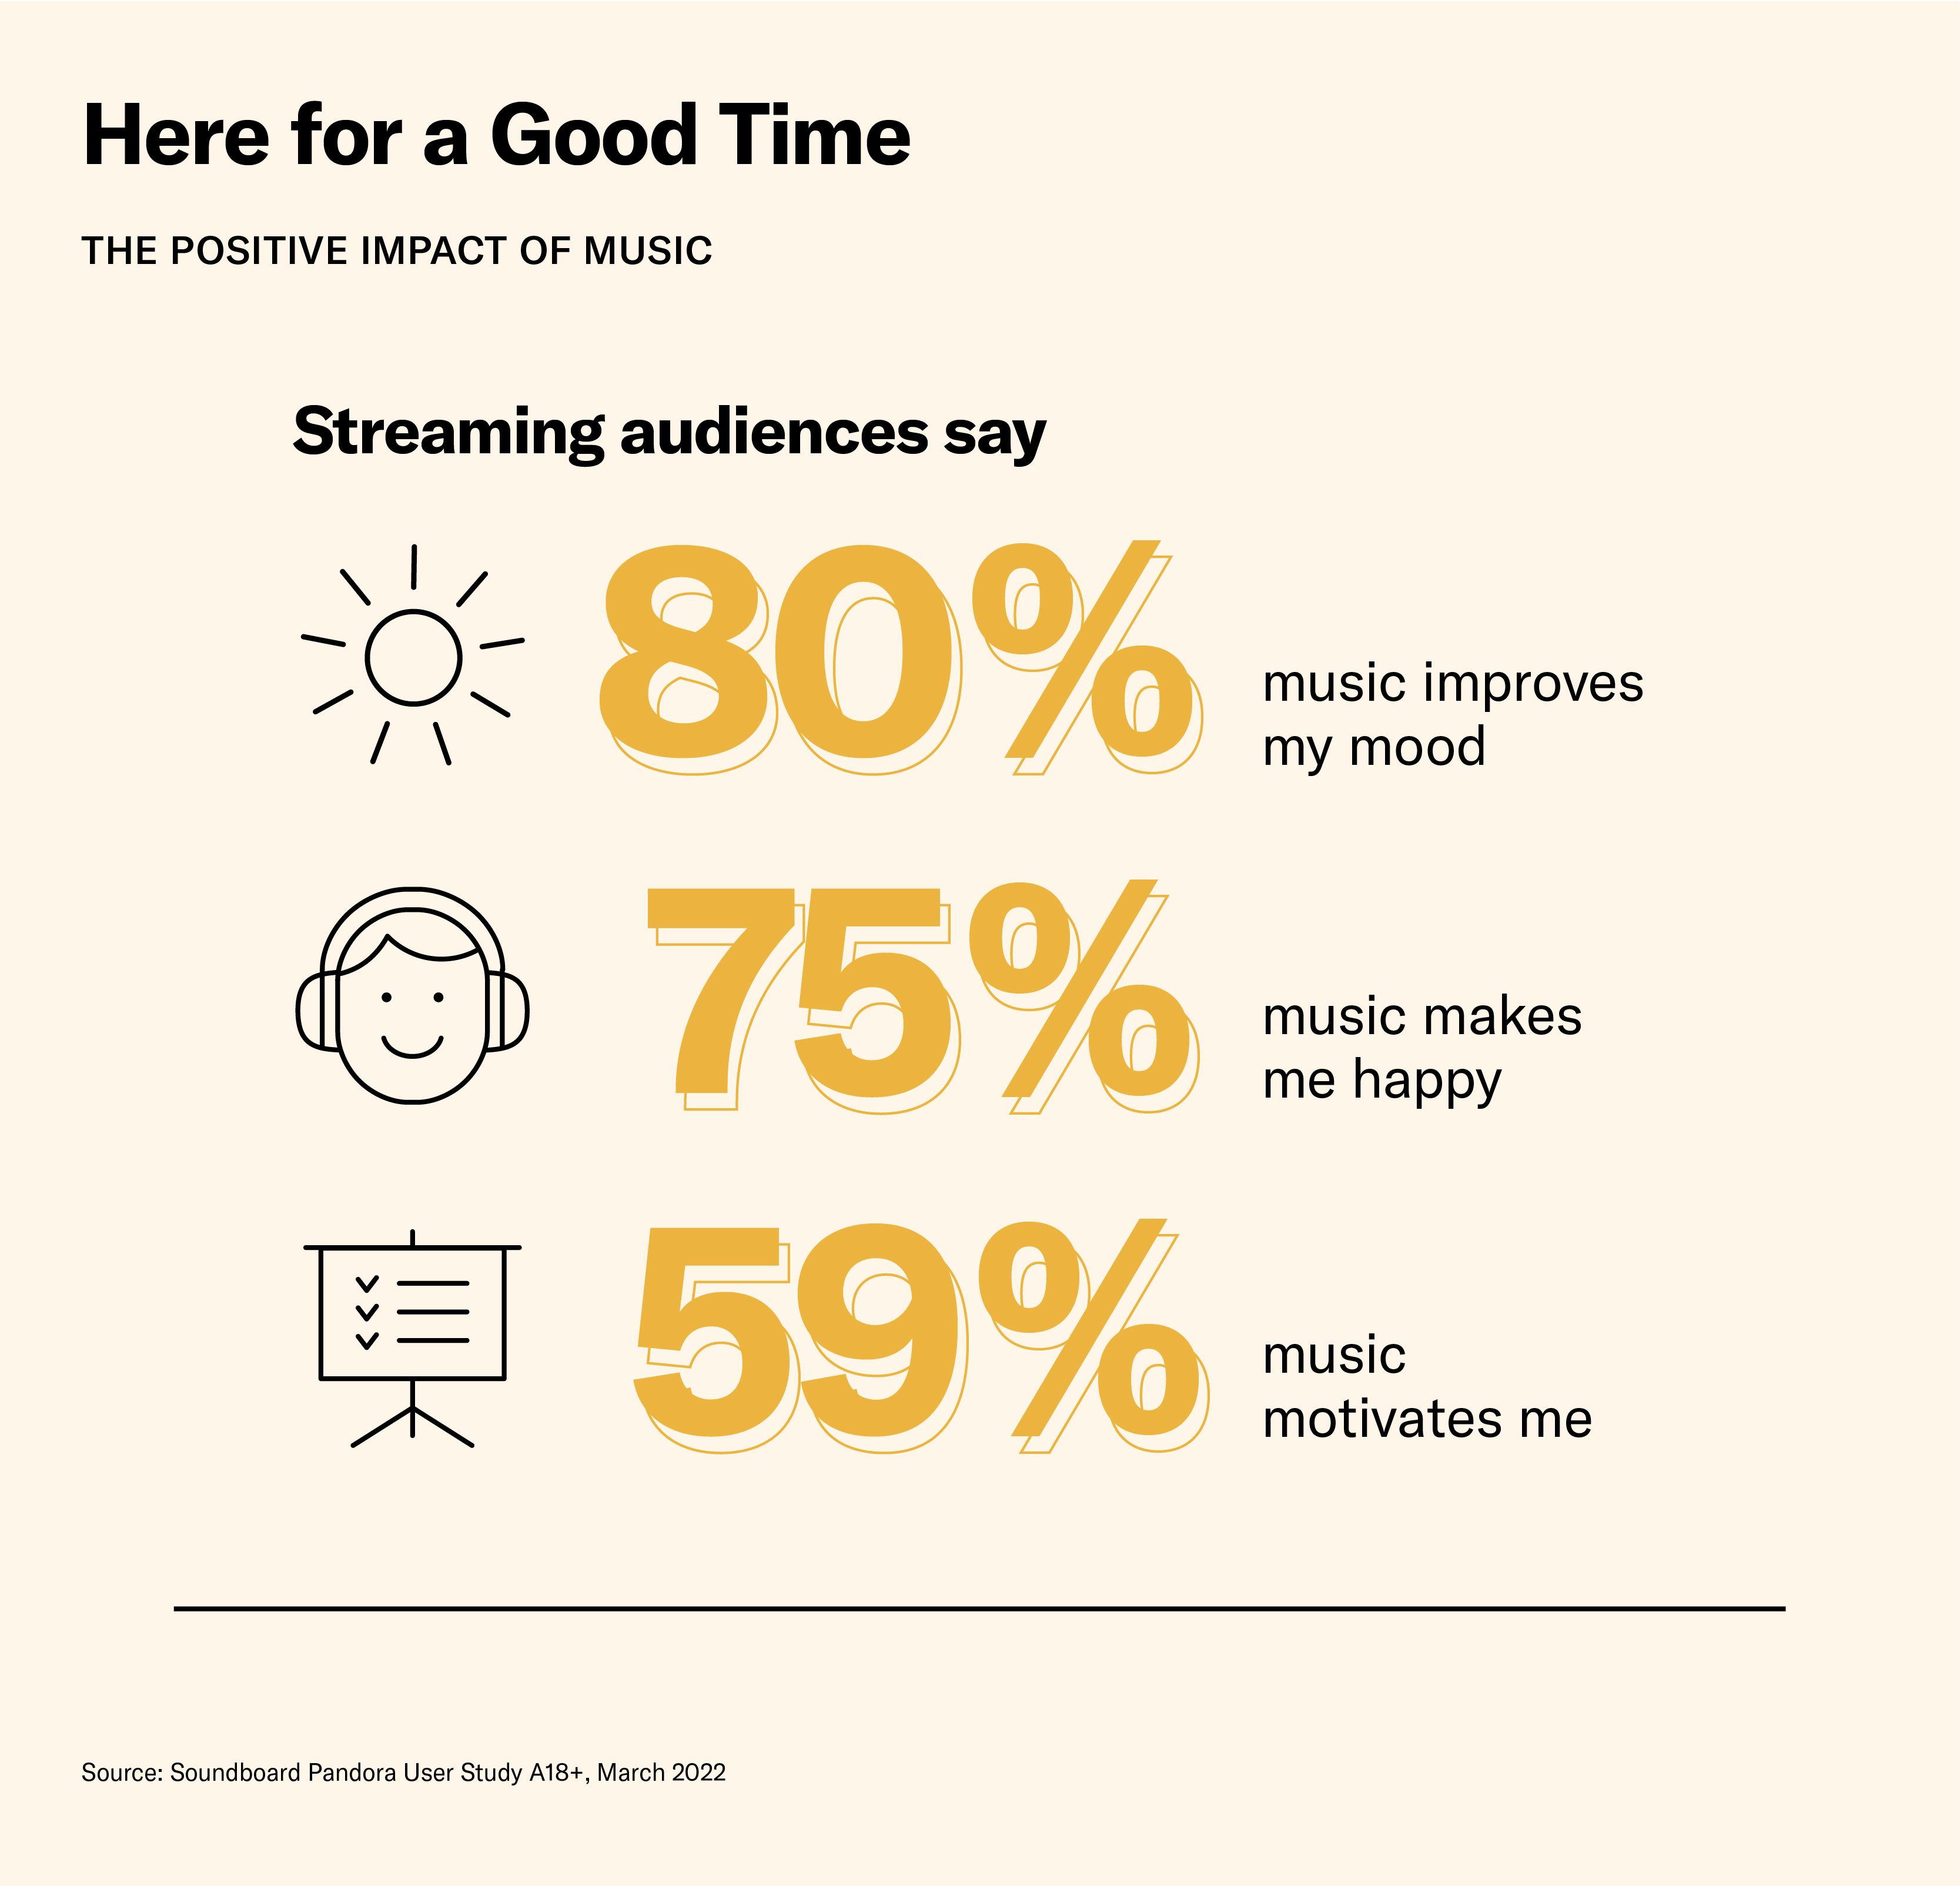 Streaming music puts audiences in a good mood